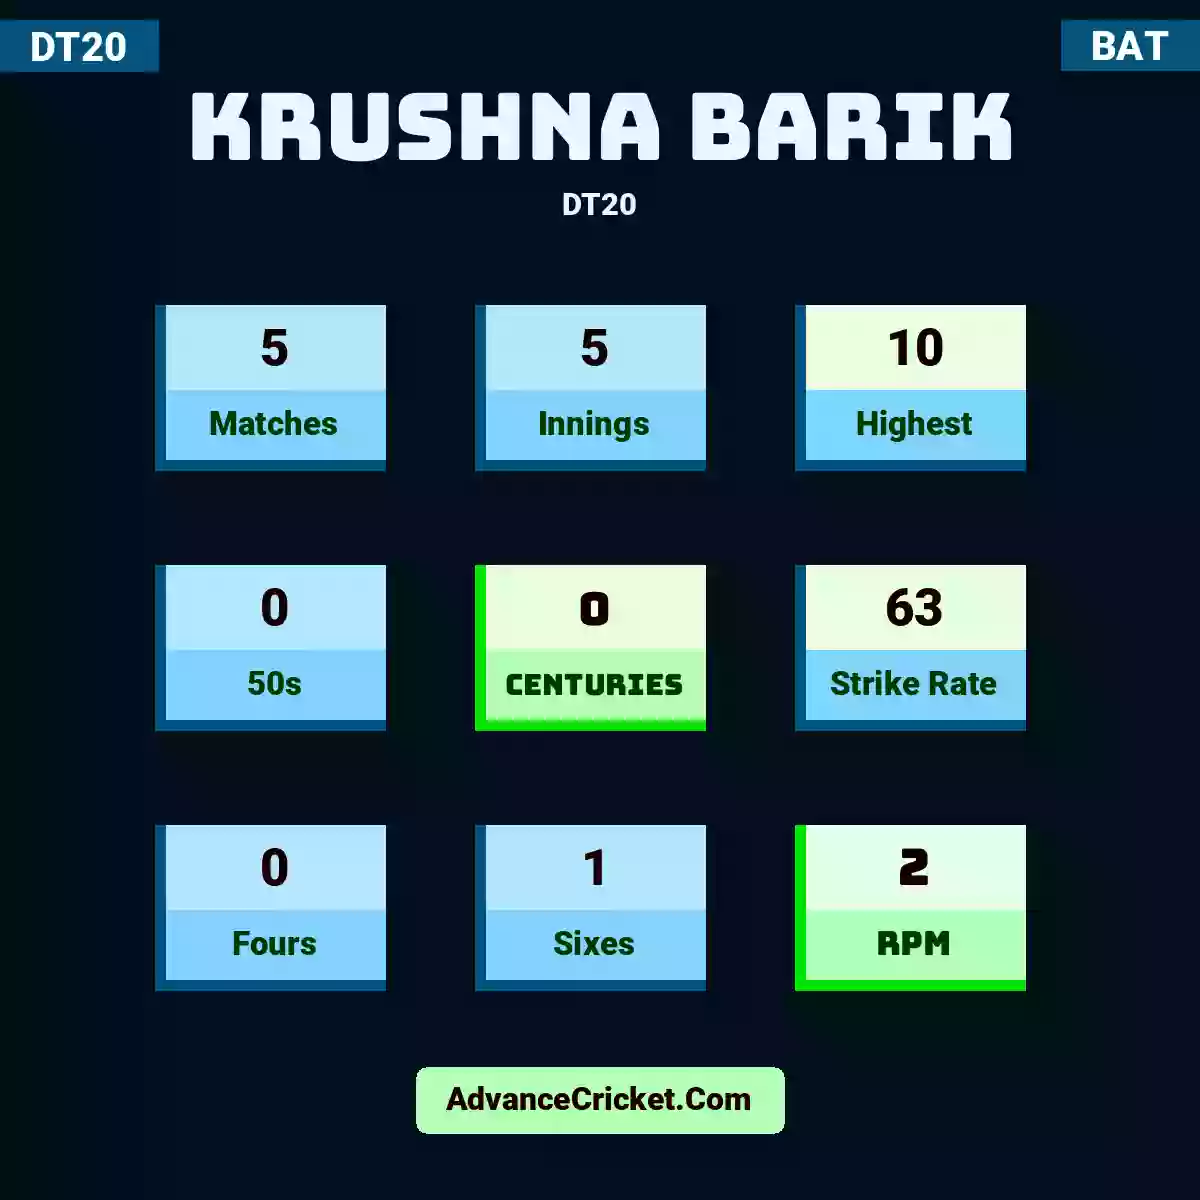 Krushna Barik DT20 , Krushna Barik played 5 matches, scored 10 runs as highest, 0 half-centuries, and 0 centuries, with a strike rate of 63. K.Barik hit 0 fours and 1 sixes, with an RPM of 2.